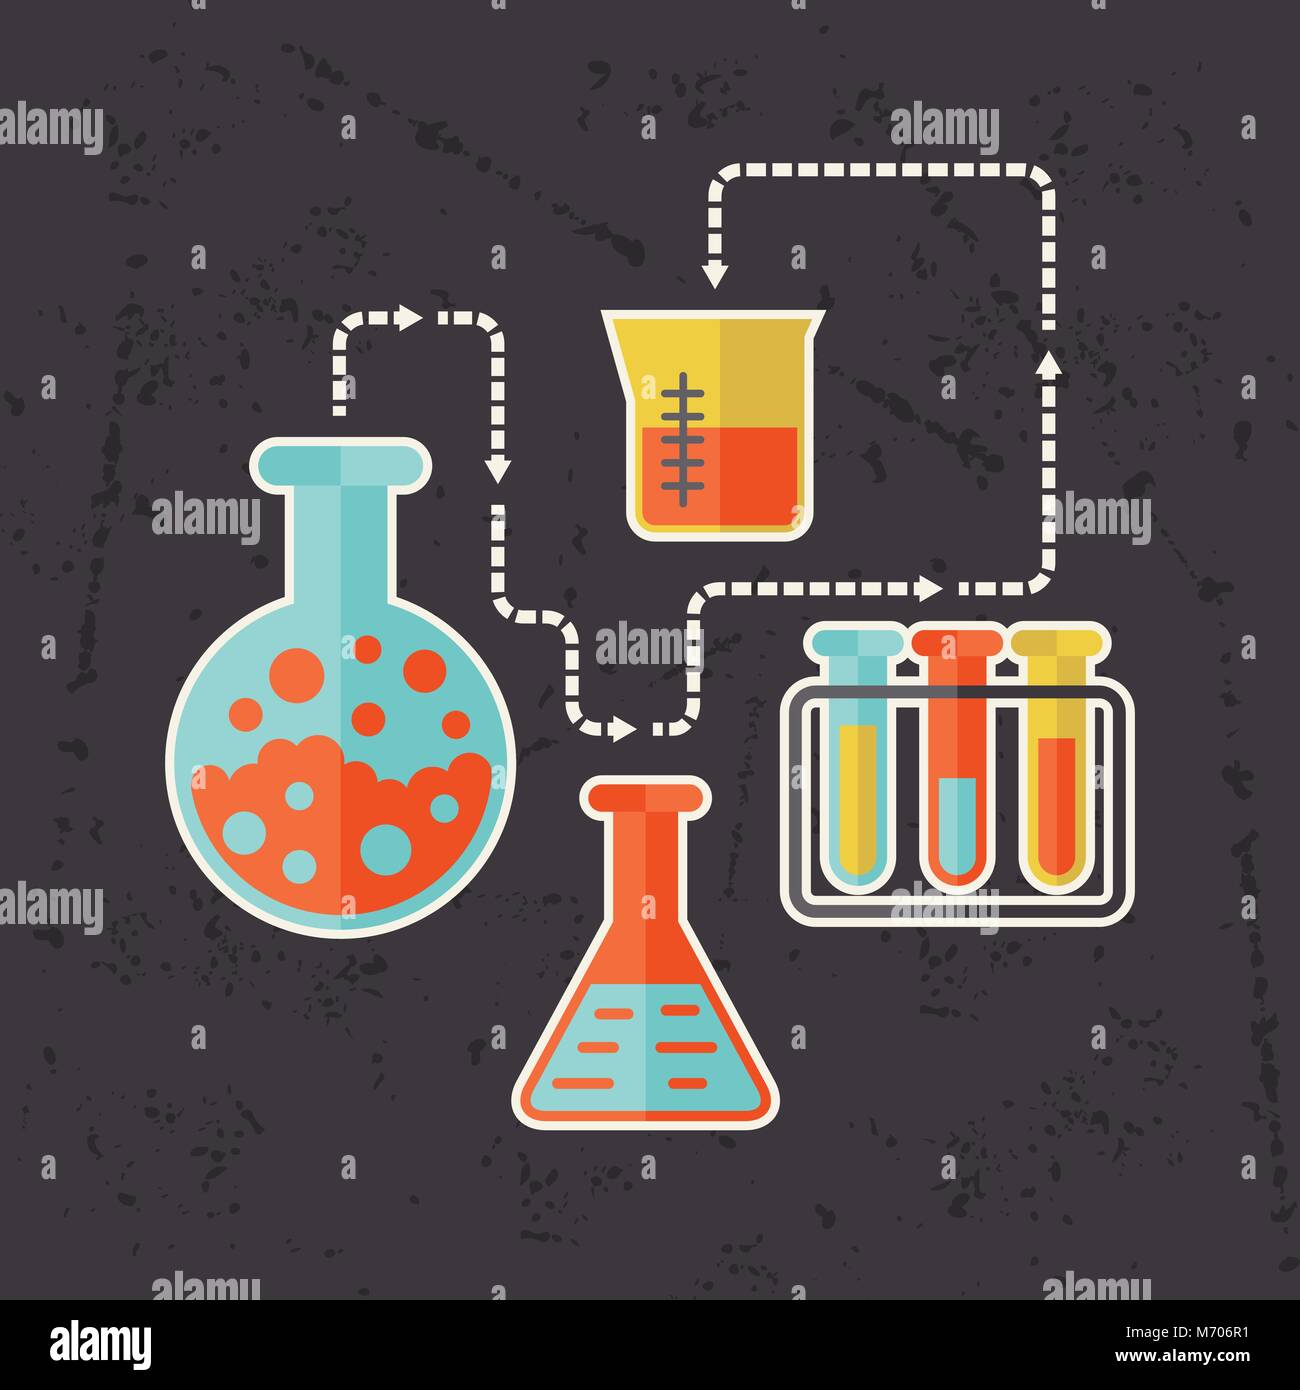 Science concept illustration in flat design style Stock Vector